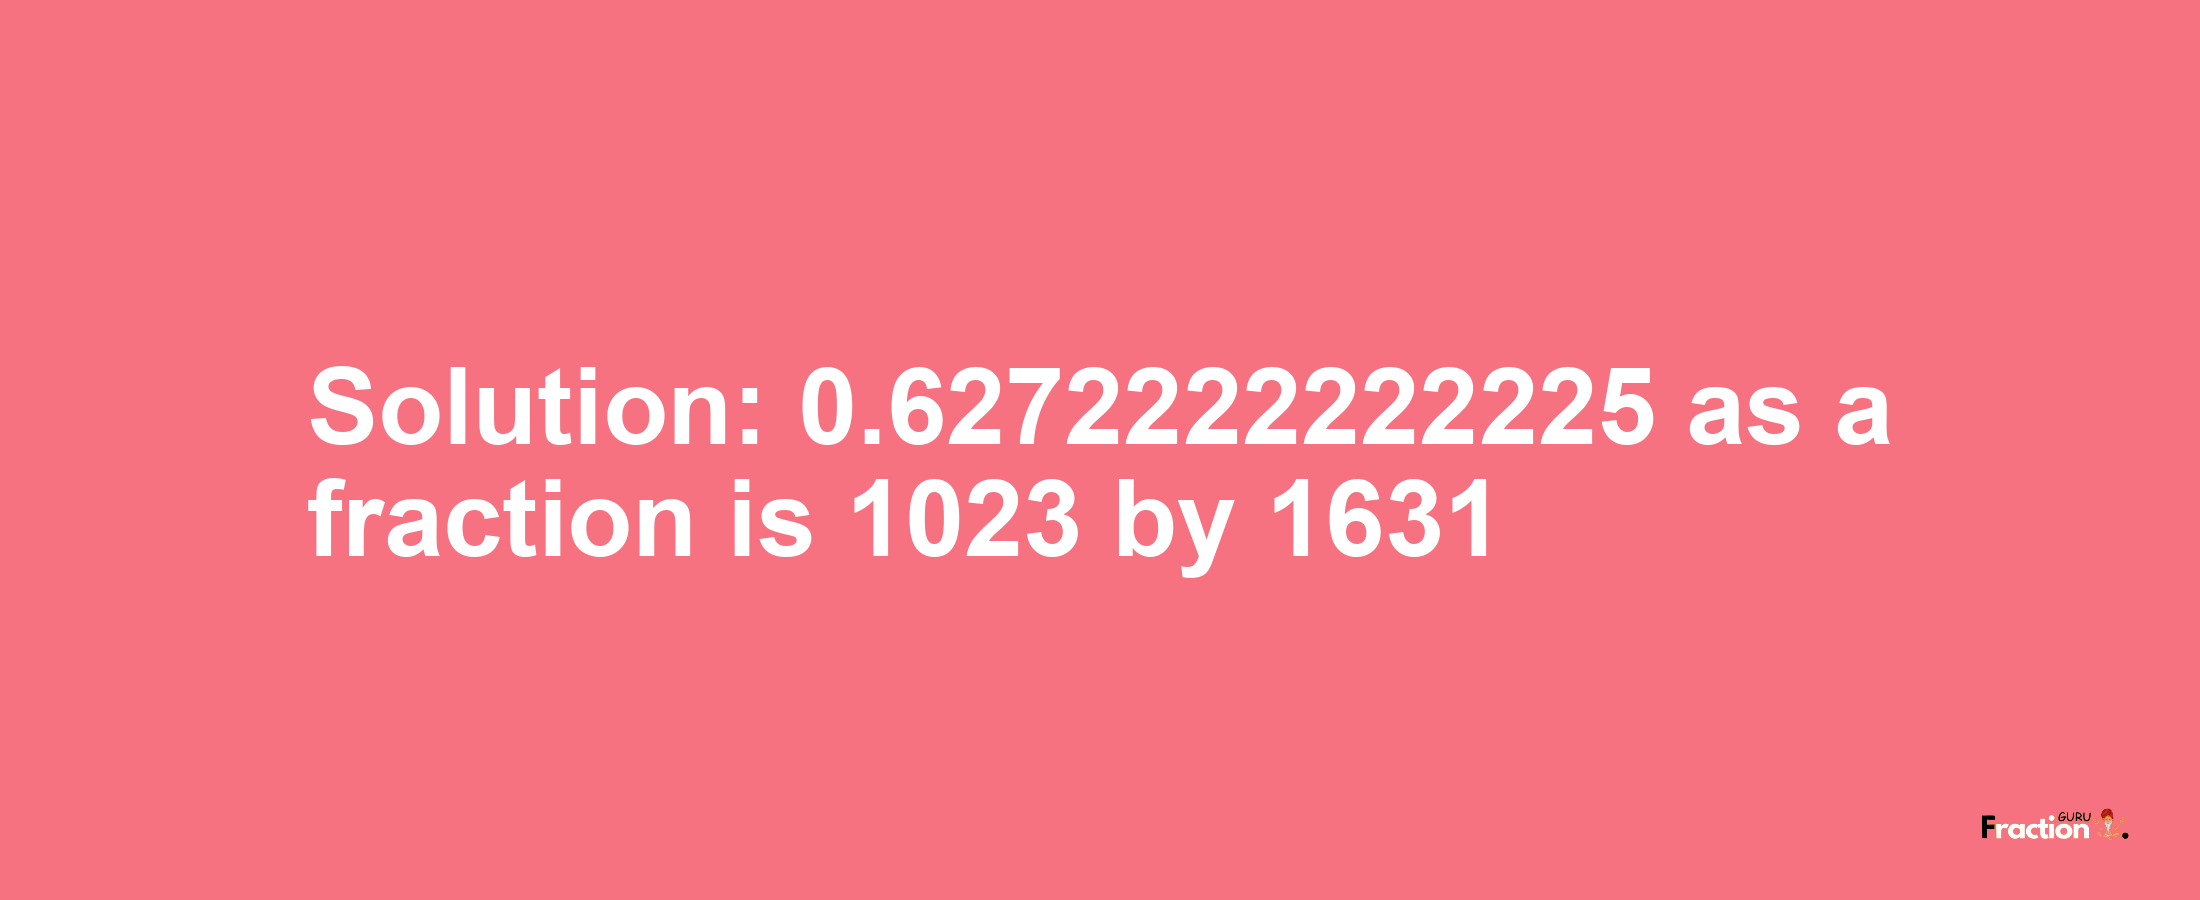 Solution:0.6272222222225 as a fraction is 1023/1631